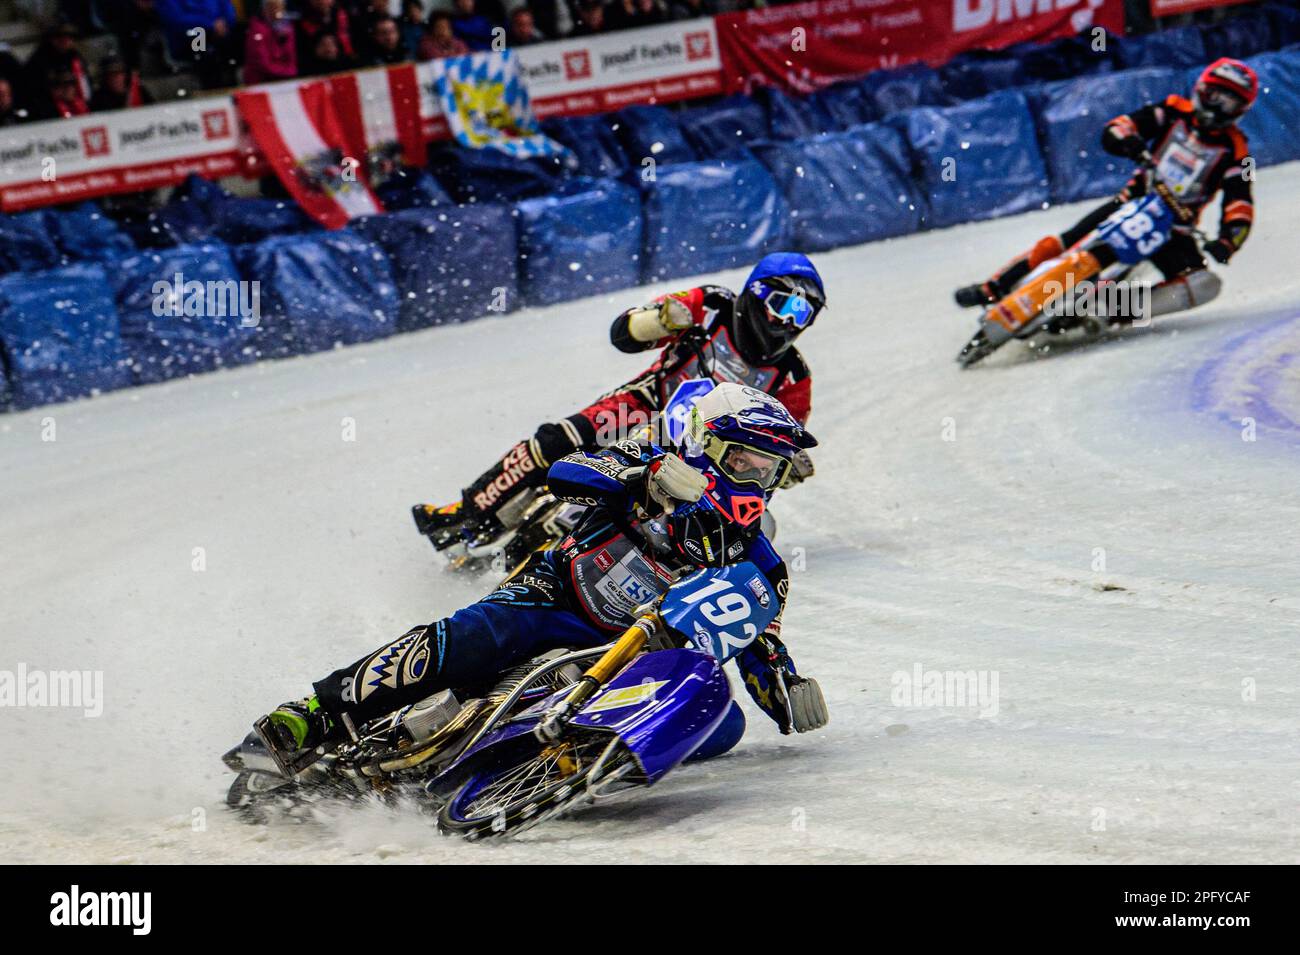 Inzell, Germany on Sunday 19th March 2023. Niclas Svensson (192) (White) leads Jo Saetre (357) (Blue) and Sebastian Reitsma (283) (Red) during the Ice Speedway Gladiators World Championship Final 2 at Max-Aicher-Arena, Inzell, Germany on Sunday 19th March 2023. (Photo: Ian Charles | MI News) Credit: MI News & Sport /Alamy Live News Stock Photo